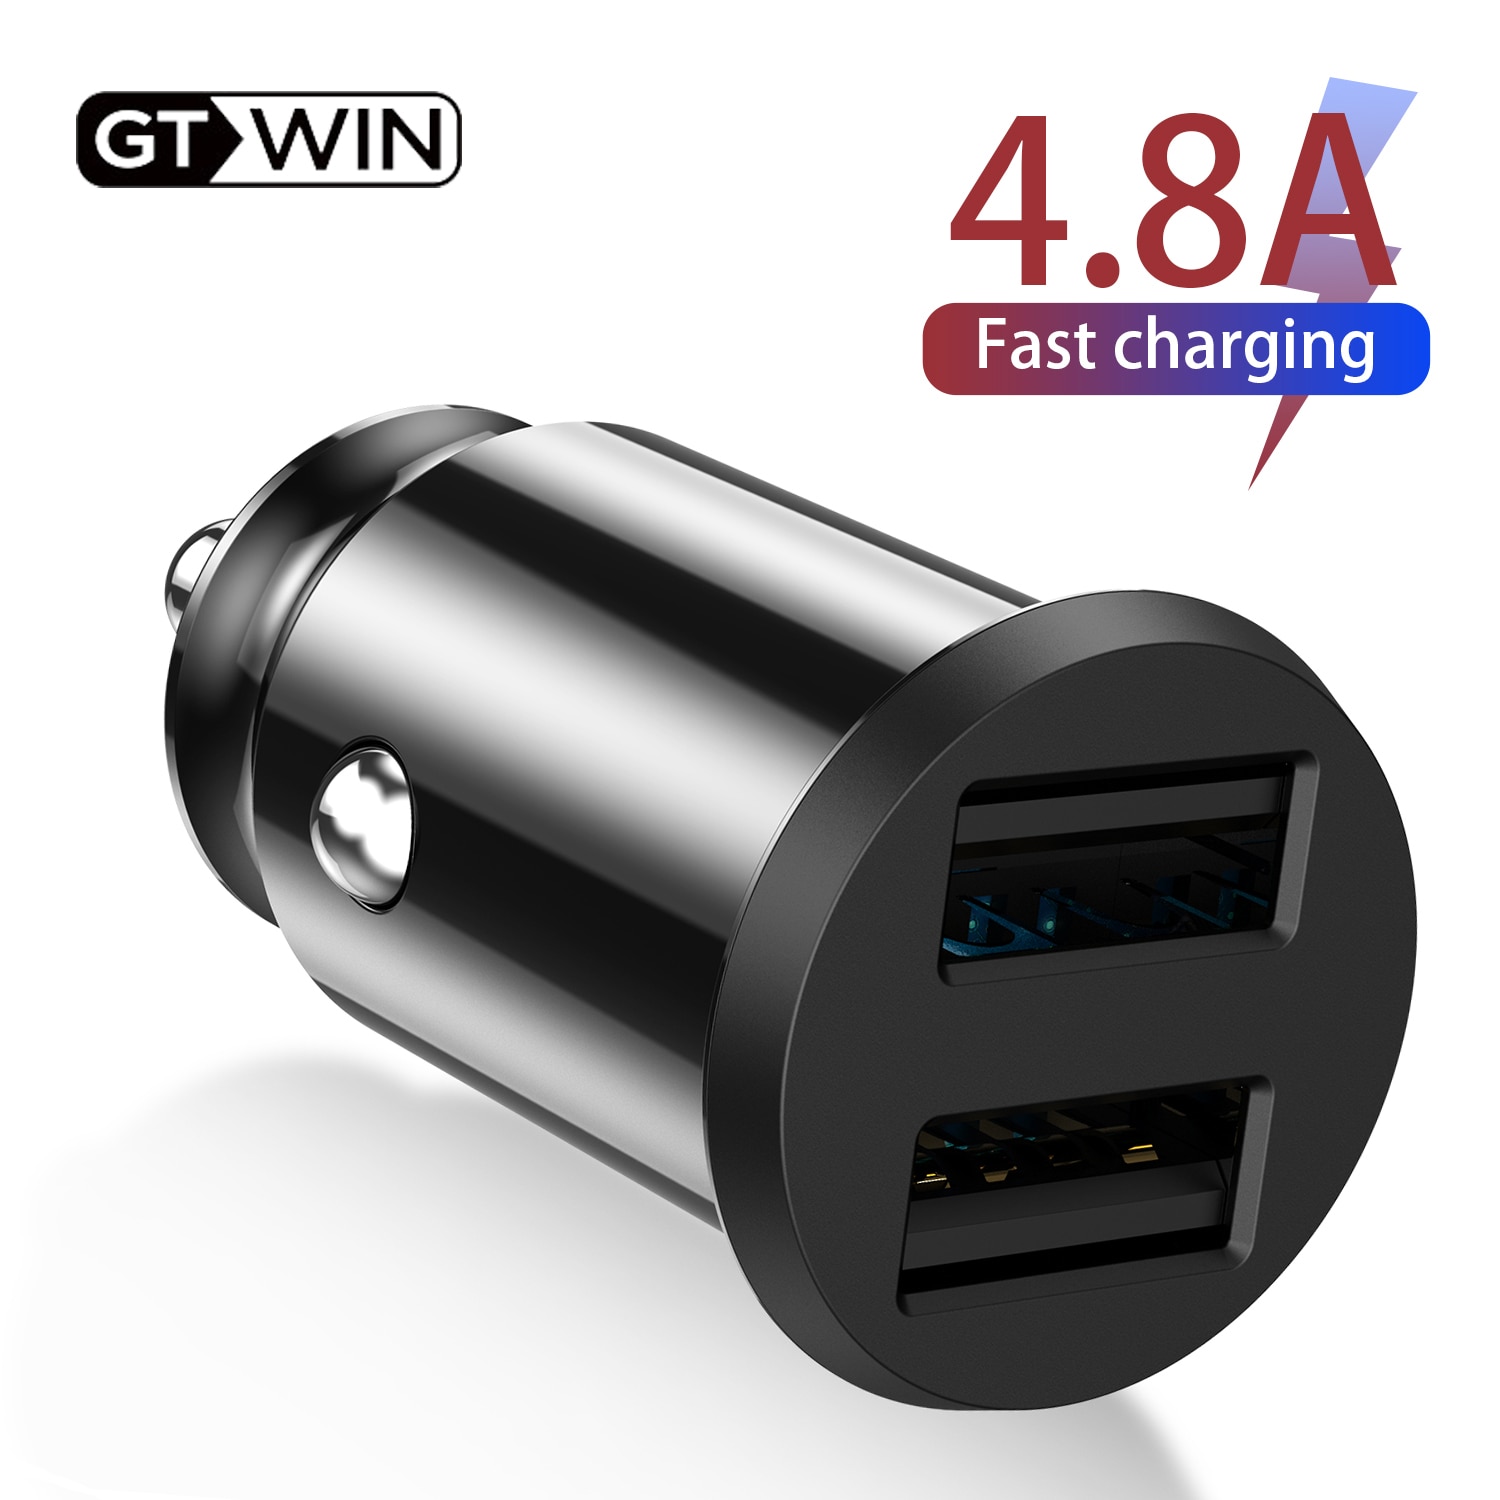 Gtwin 4.8A Autolader Voor Iphone Xiaomi Samsung Mobiele Telefoon Adapter In Auto Smartphone Tablet Quick Charge Dual Usb Auto lader